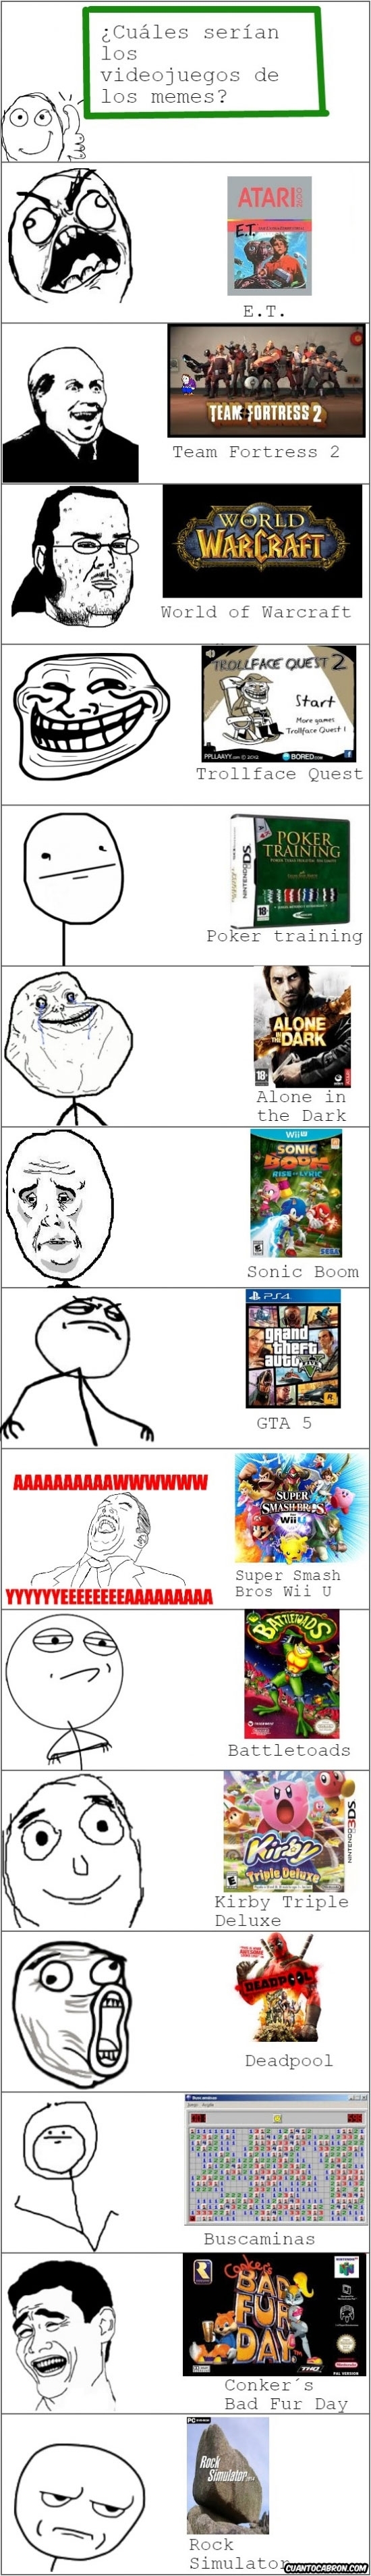 alone in the dark,battletoads,buscaminas,conker´s bad fur day,dead or alive xtreme,deadpool,e.t.,gta 5,kirby triple deluxe,poker training,rock simulator,sonic boom,super smash bros for wii u,team fortress 2,trollface quest,world of warcraft